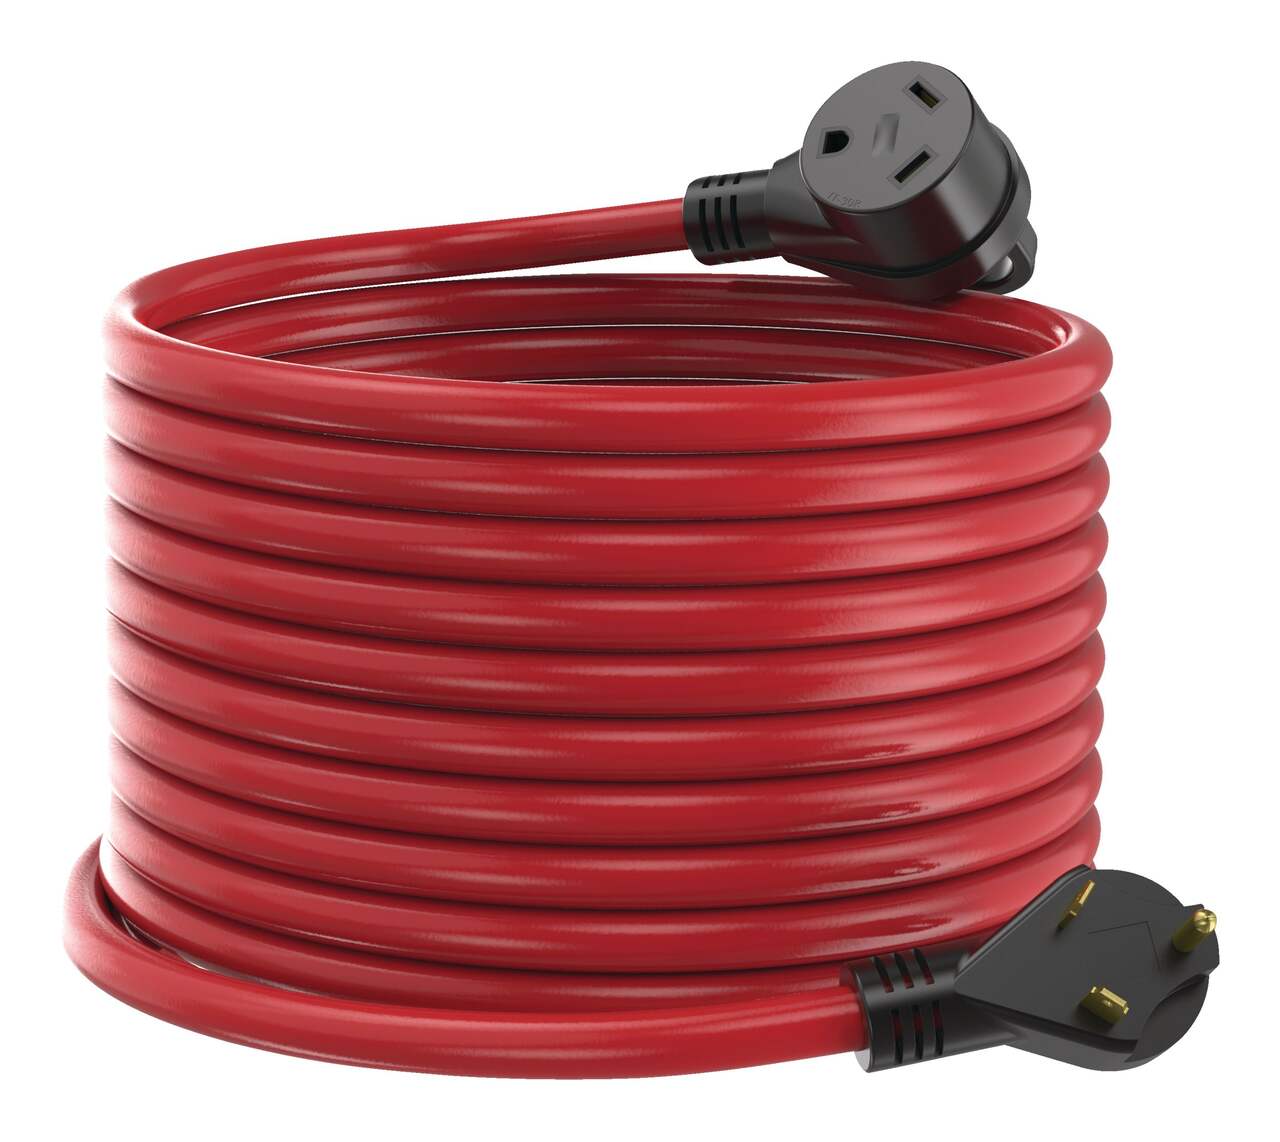 https://media-www.canadiantire.ca/product/automotive/automotive-outdoor-adventure/auto-travel-storage/0408237/50ft-30amp-male-to-30amp-female-power-extension-cord-e1b63875-f521-4f72-b937-fffb61bb527e-jpgrendition.jpg?imdensity=1&imwidth=1244&impolicy=mZoom